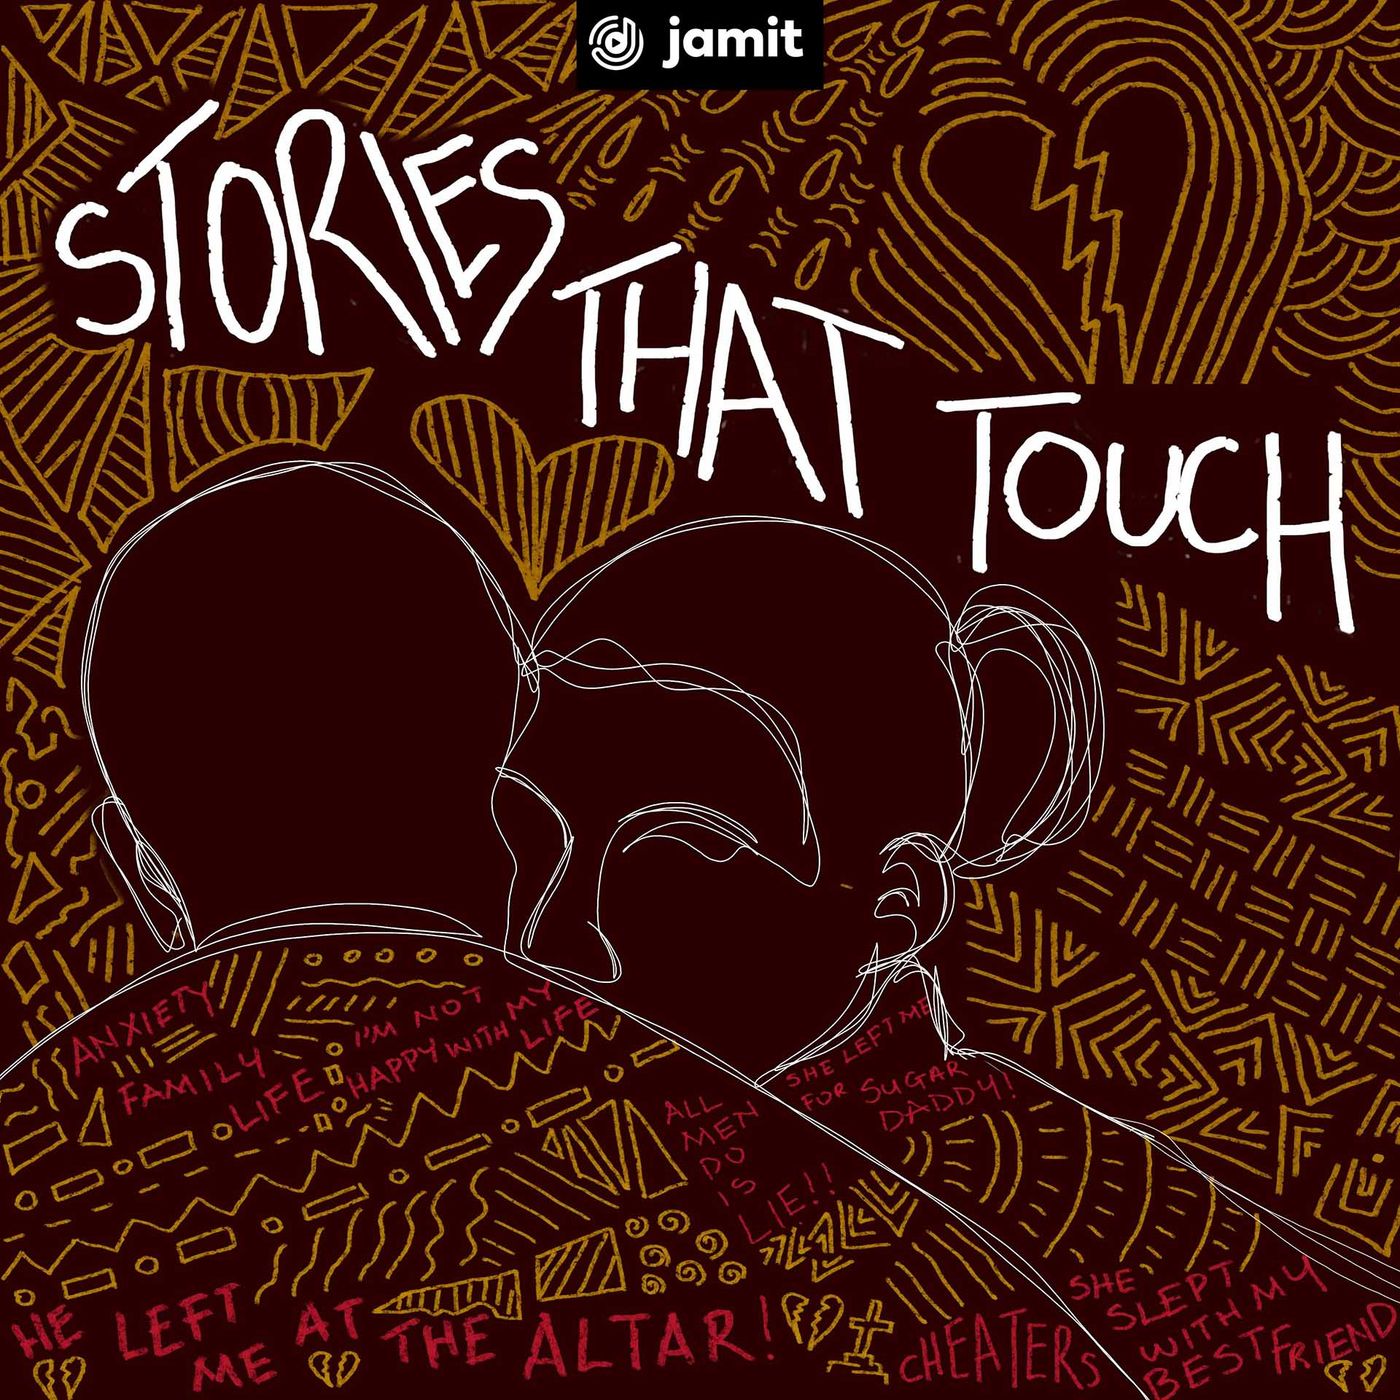 Stories That Touch